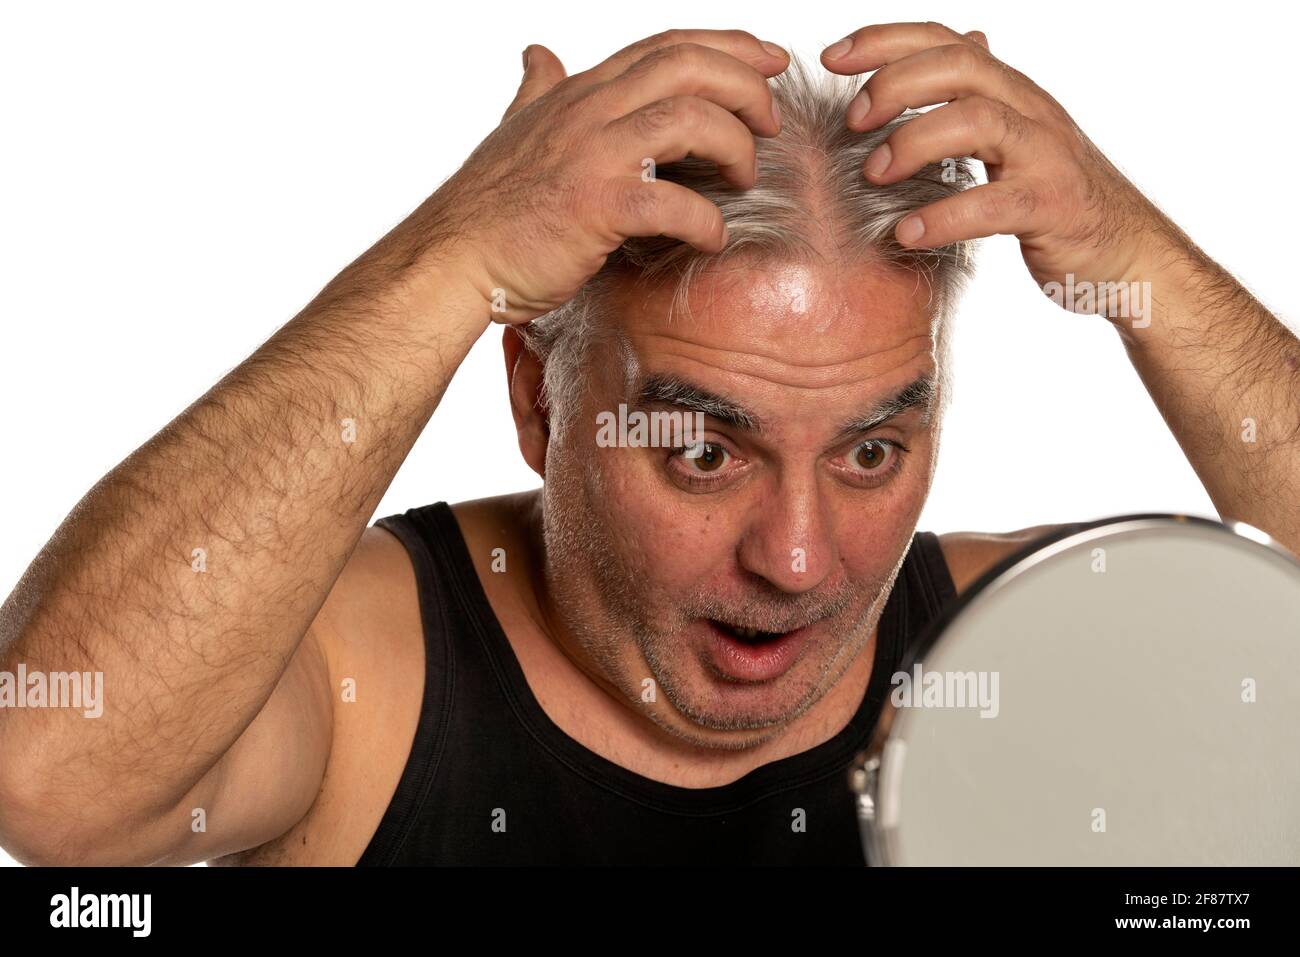 shocked middle aged man with short gray hair on white background Stock Photo